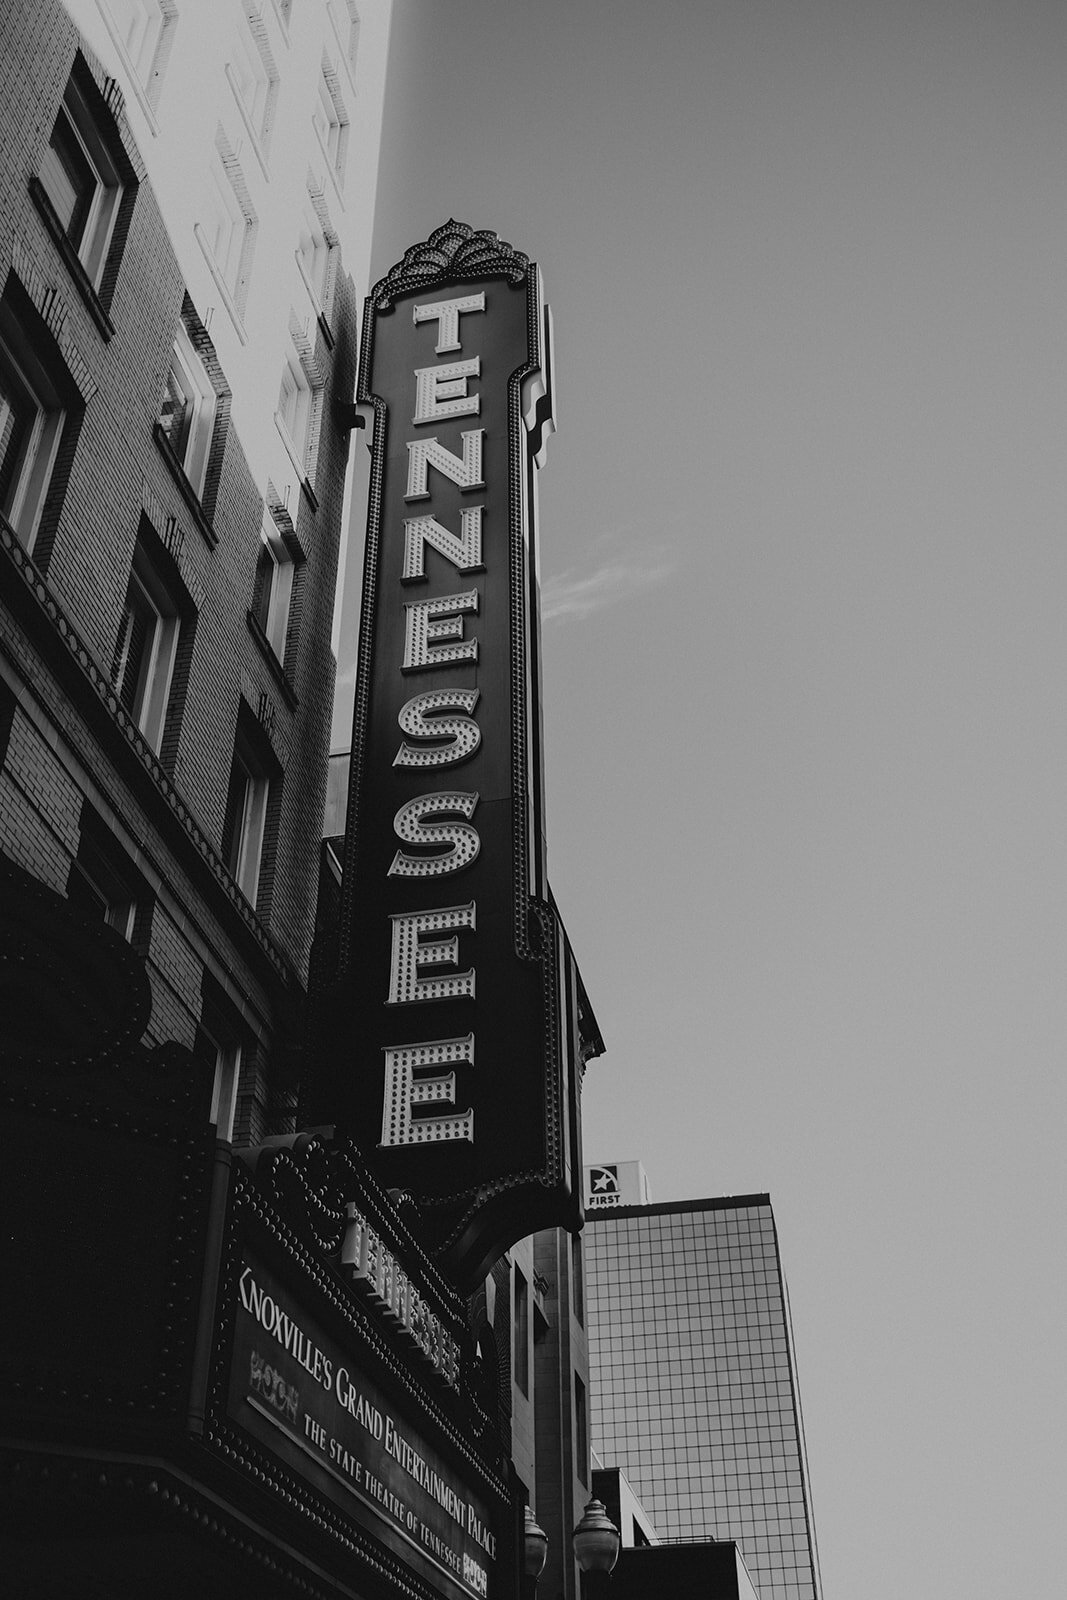 Tennessee theater sign in downtown Knoxville